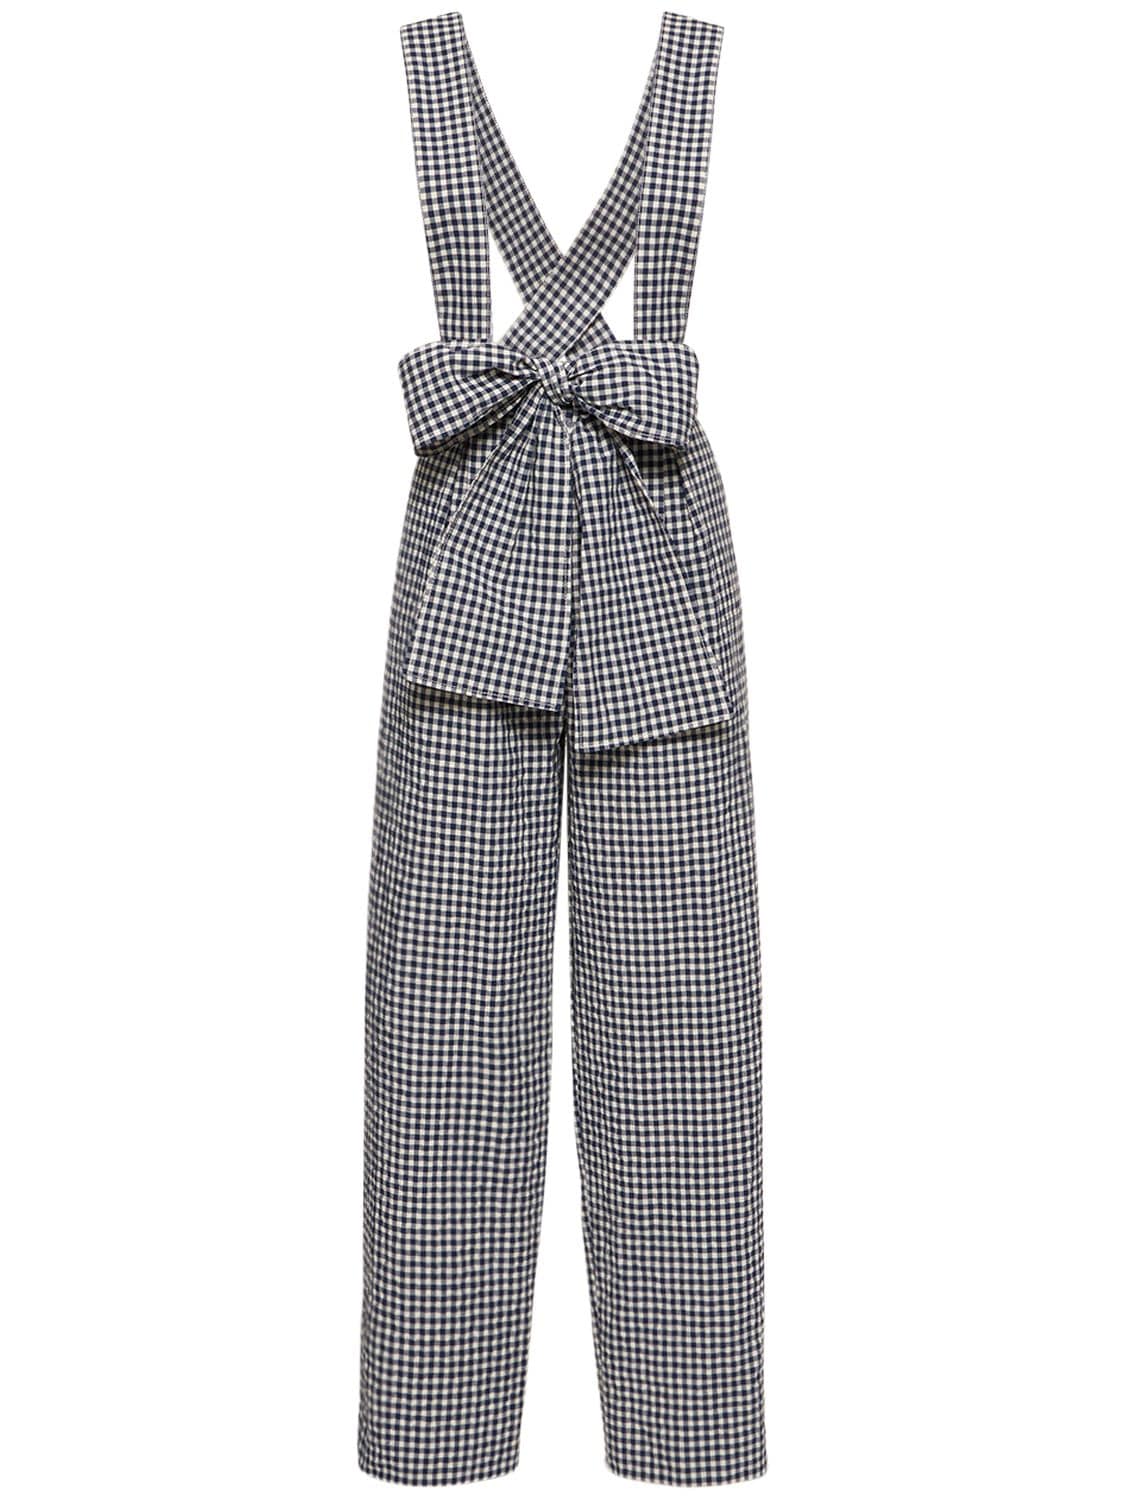 KENZO COTTON BLEND OVERALLS W/BOW